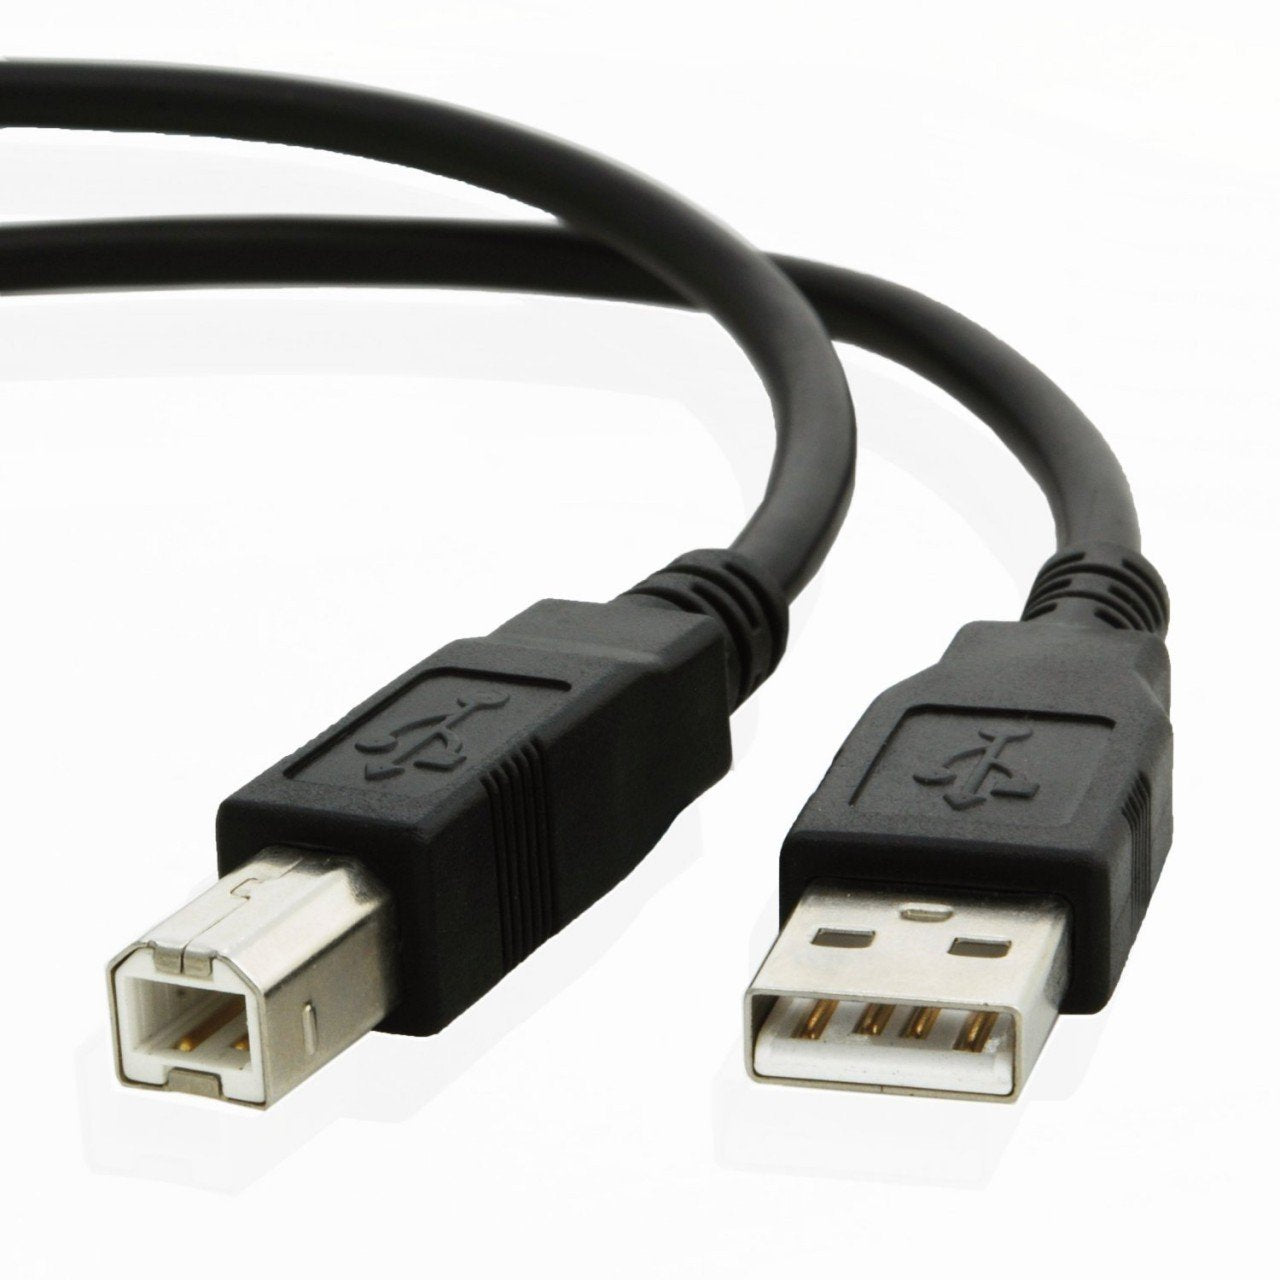 USB cable for Brother MFC-J6520DW